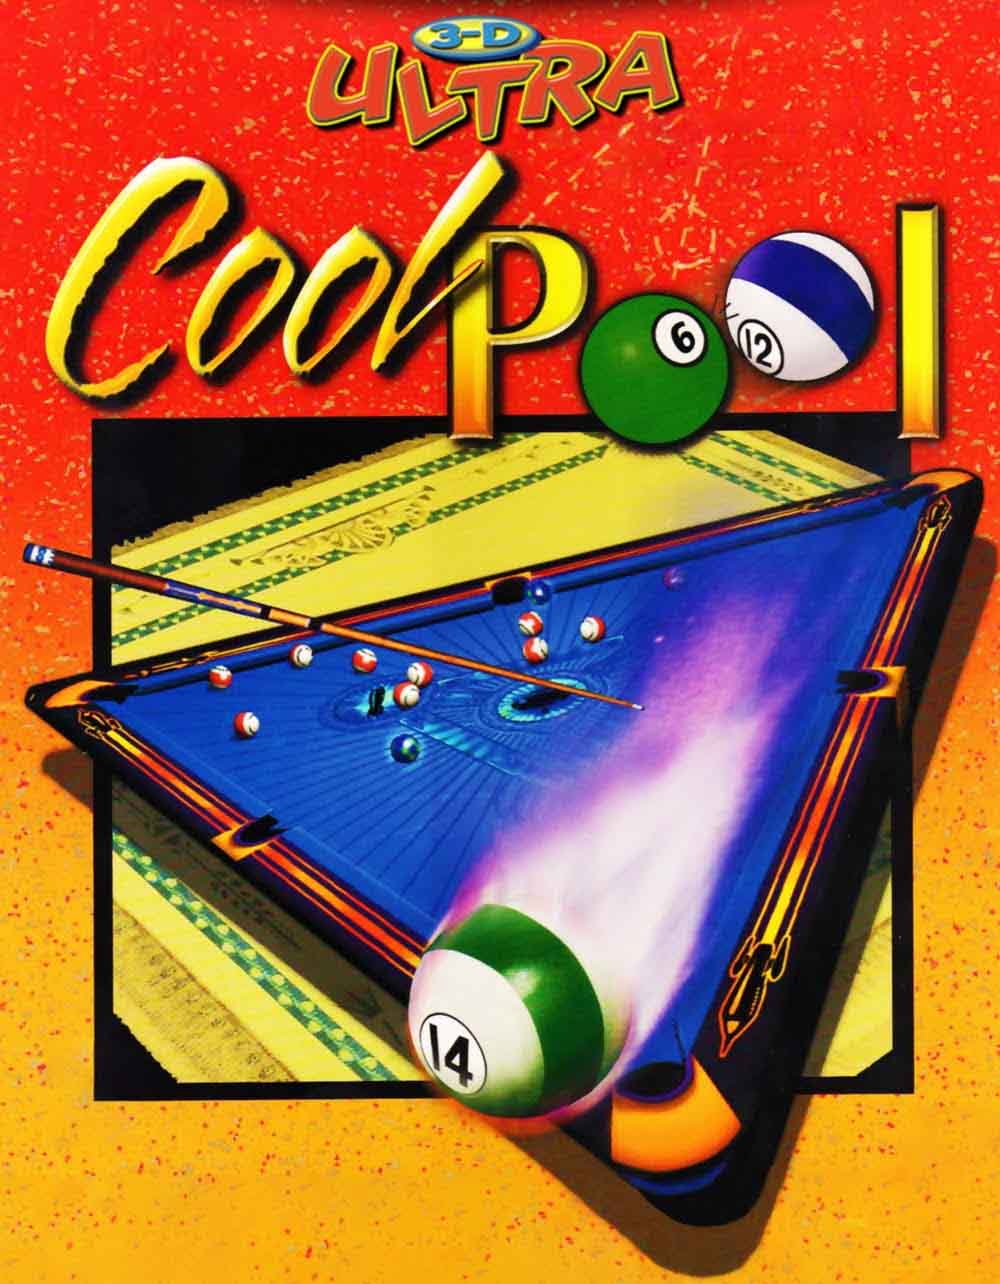 3-D Ultra Cool Pool Game Cover